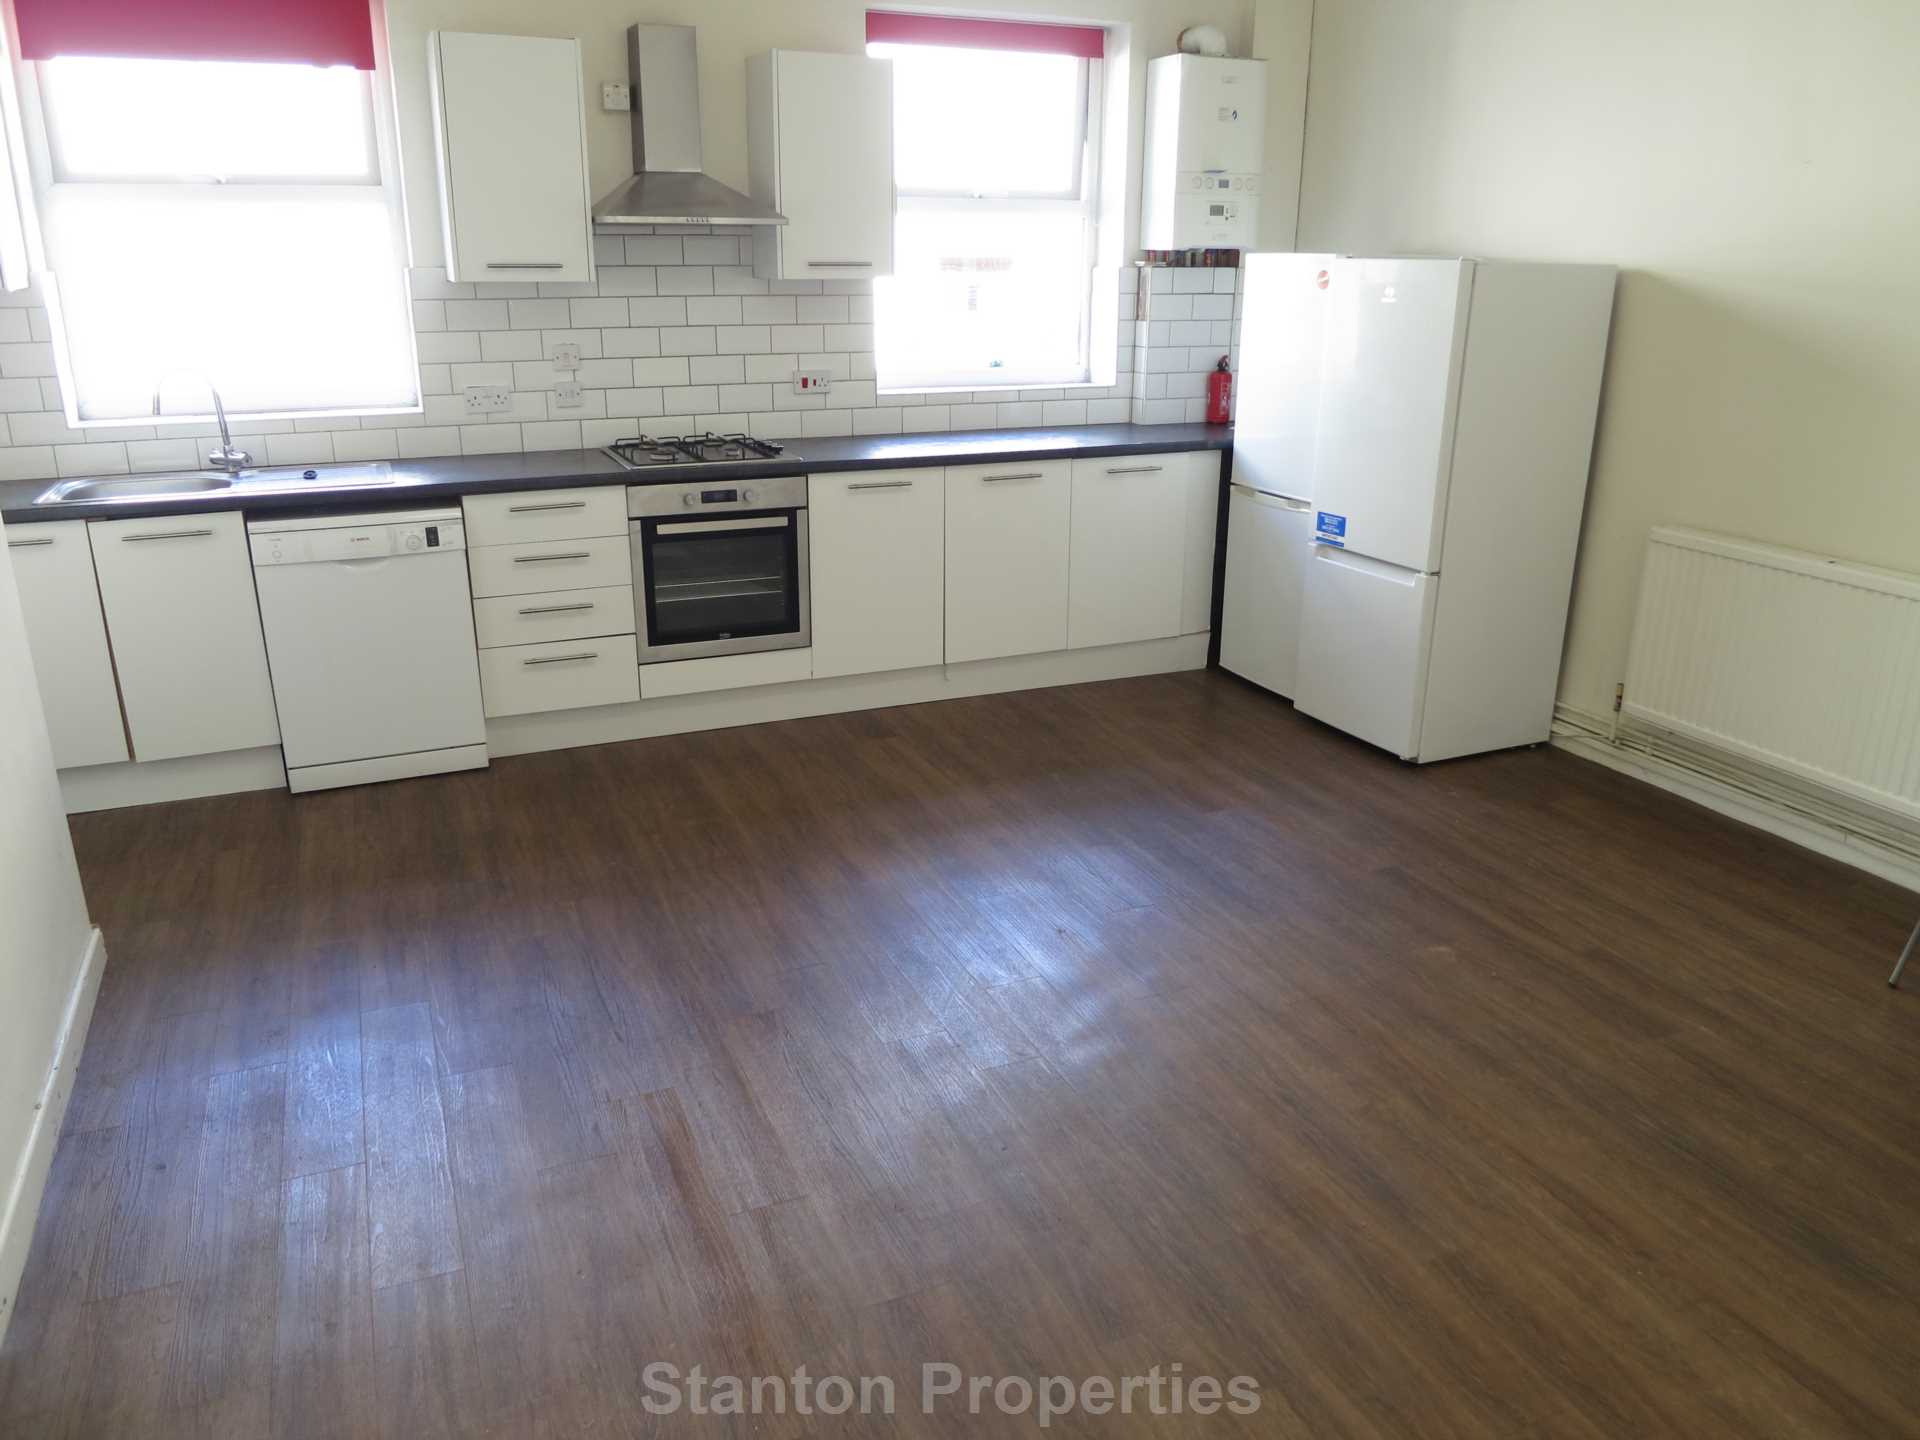 See Video Tour, £120 pppw, Copson Street, Withington, Image 4